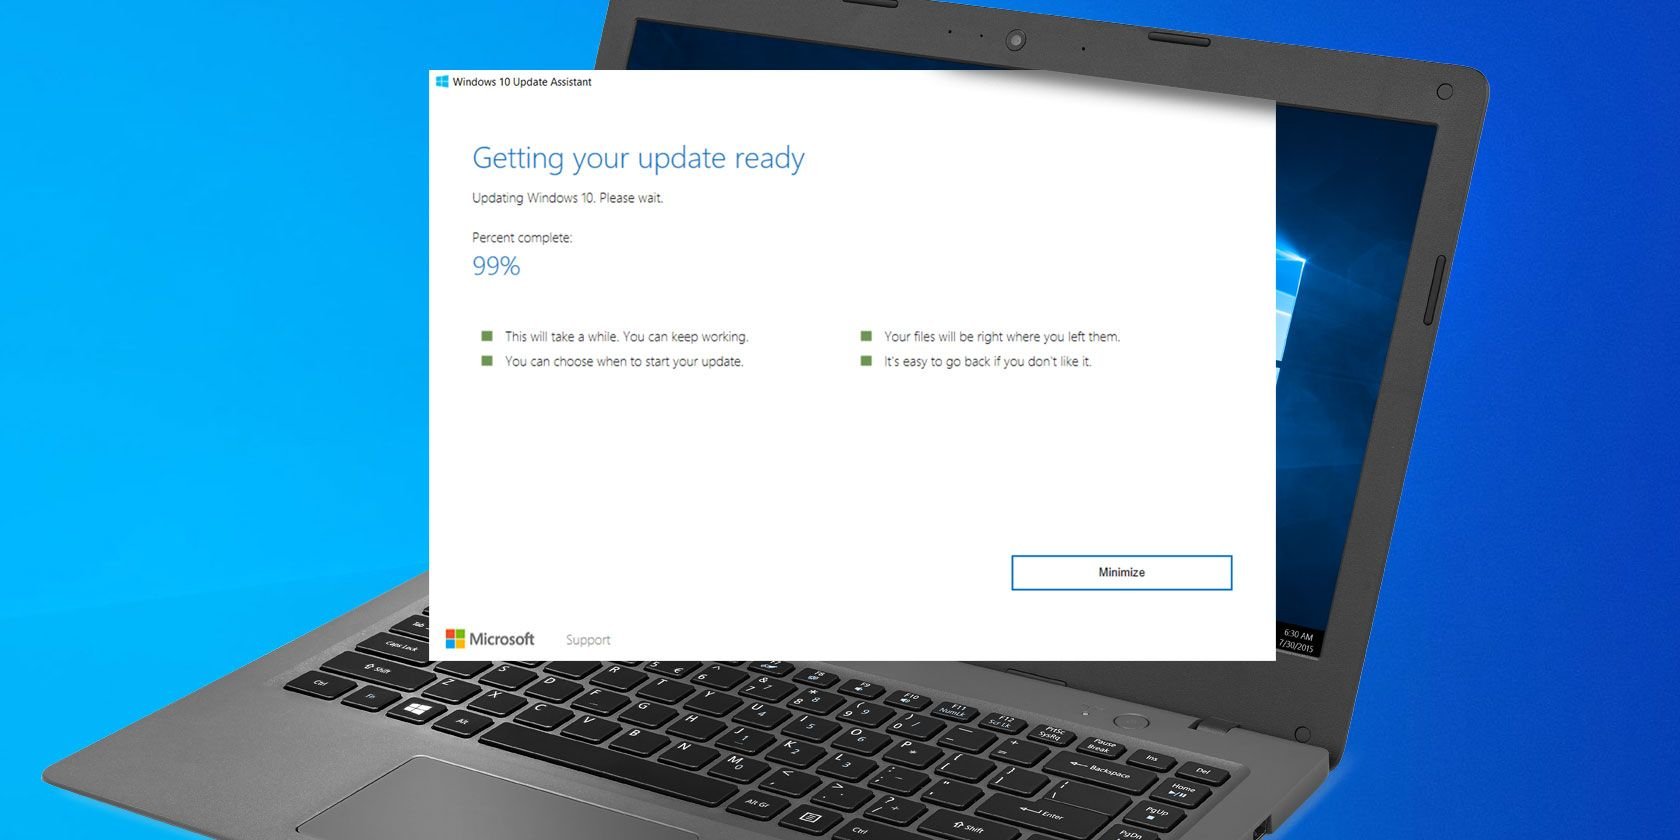 How to Fix a Stuck Windows Update Assistant and Rescue Your Update